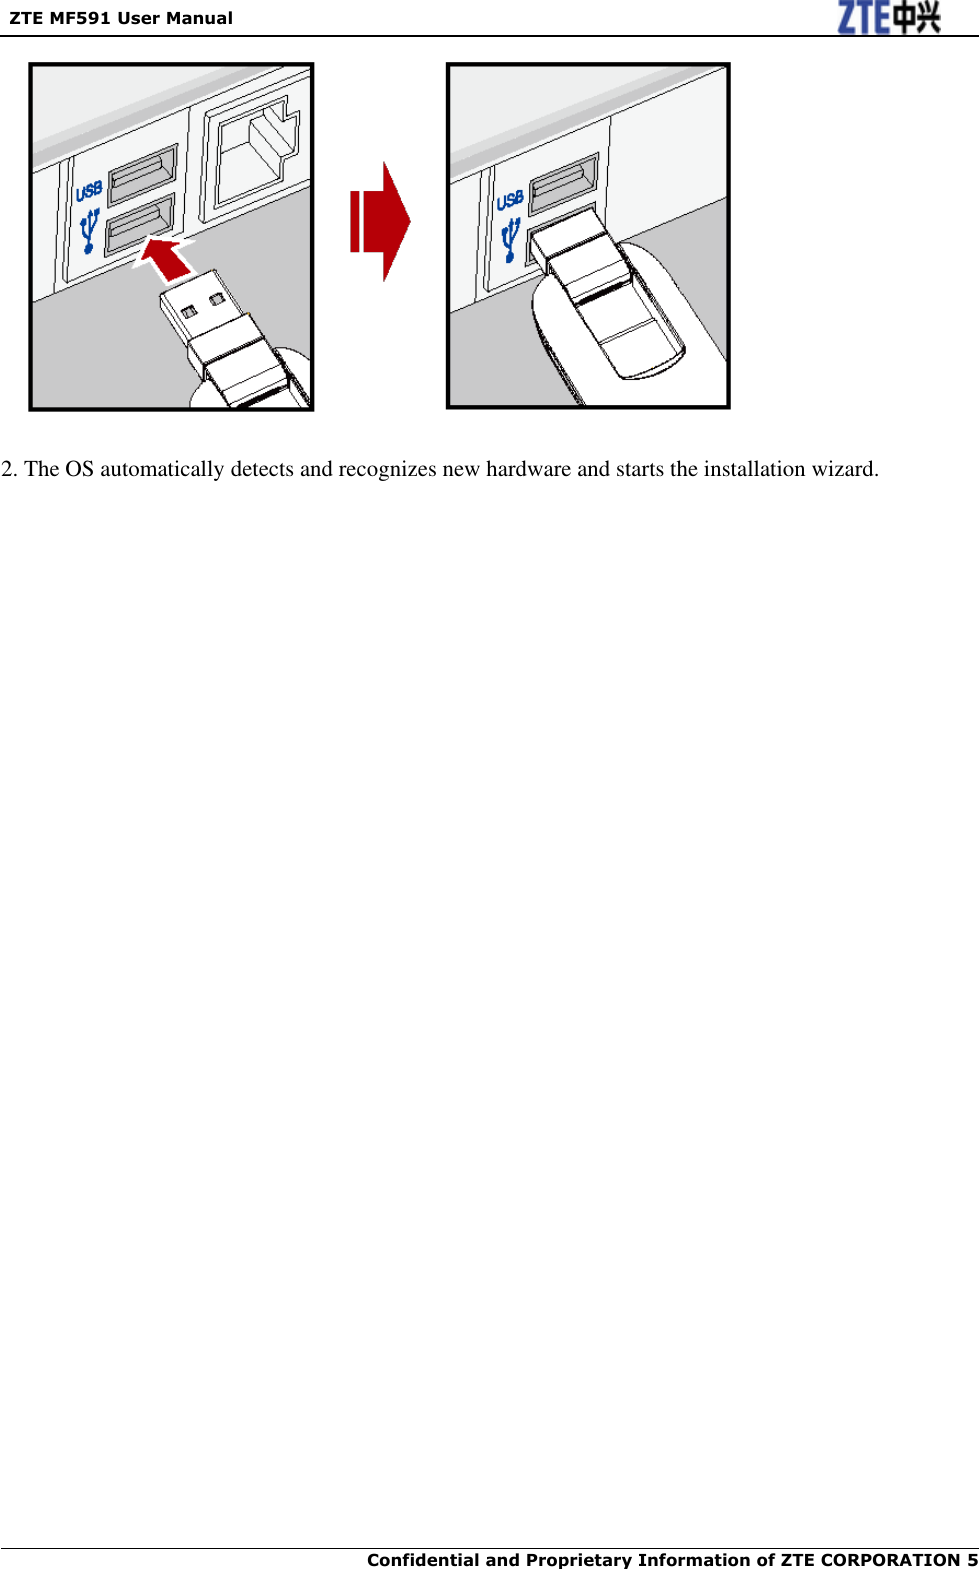   ZTE MF591 User Manual  Confidential and Proprietary Information of ZTE CORPORATION 5       2. The OS automatically detects and recognizes new hardware and starts the installation wizard.   